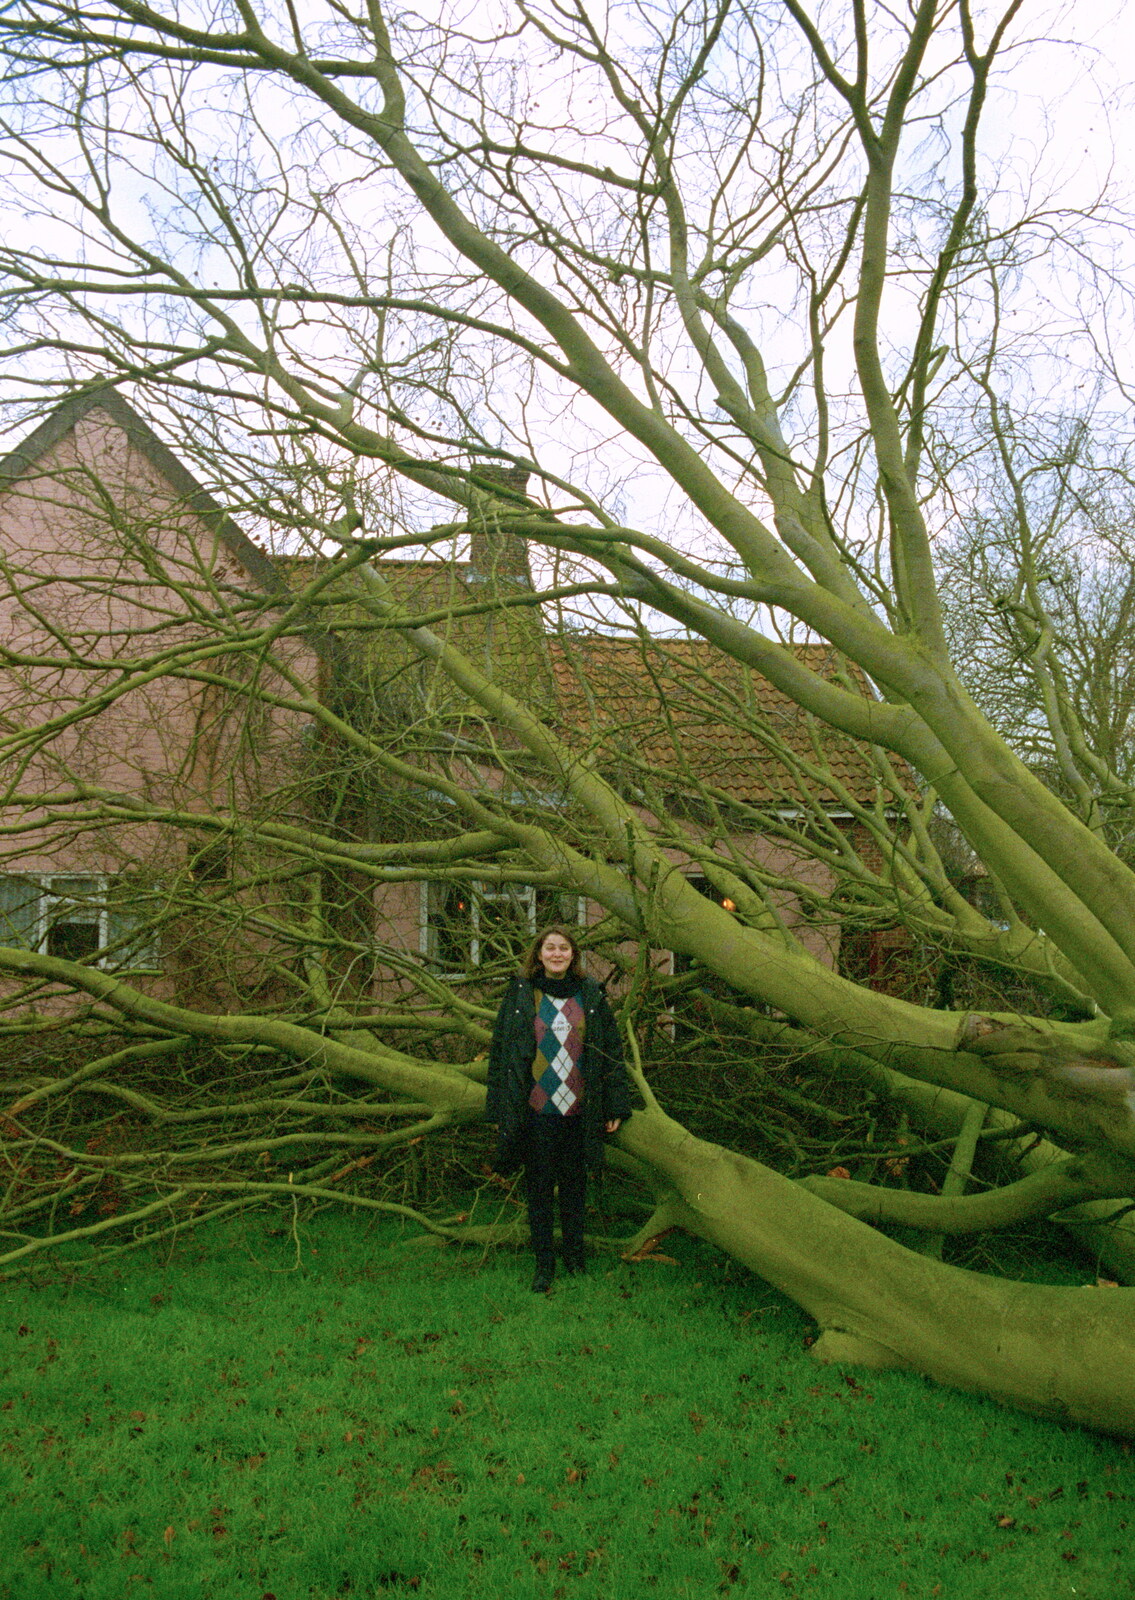 A Fallen Tree at The Swan, Brome, Suffolk - January 21st 2001: Claire stands next to the tree, for scale